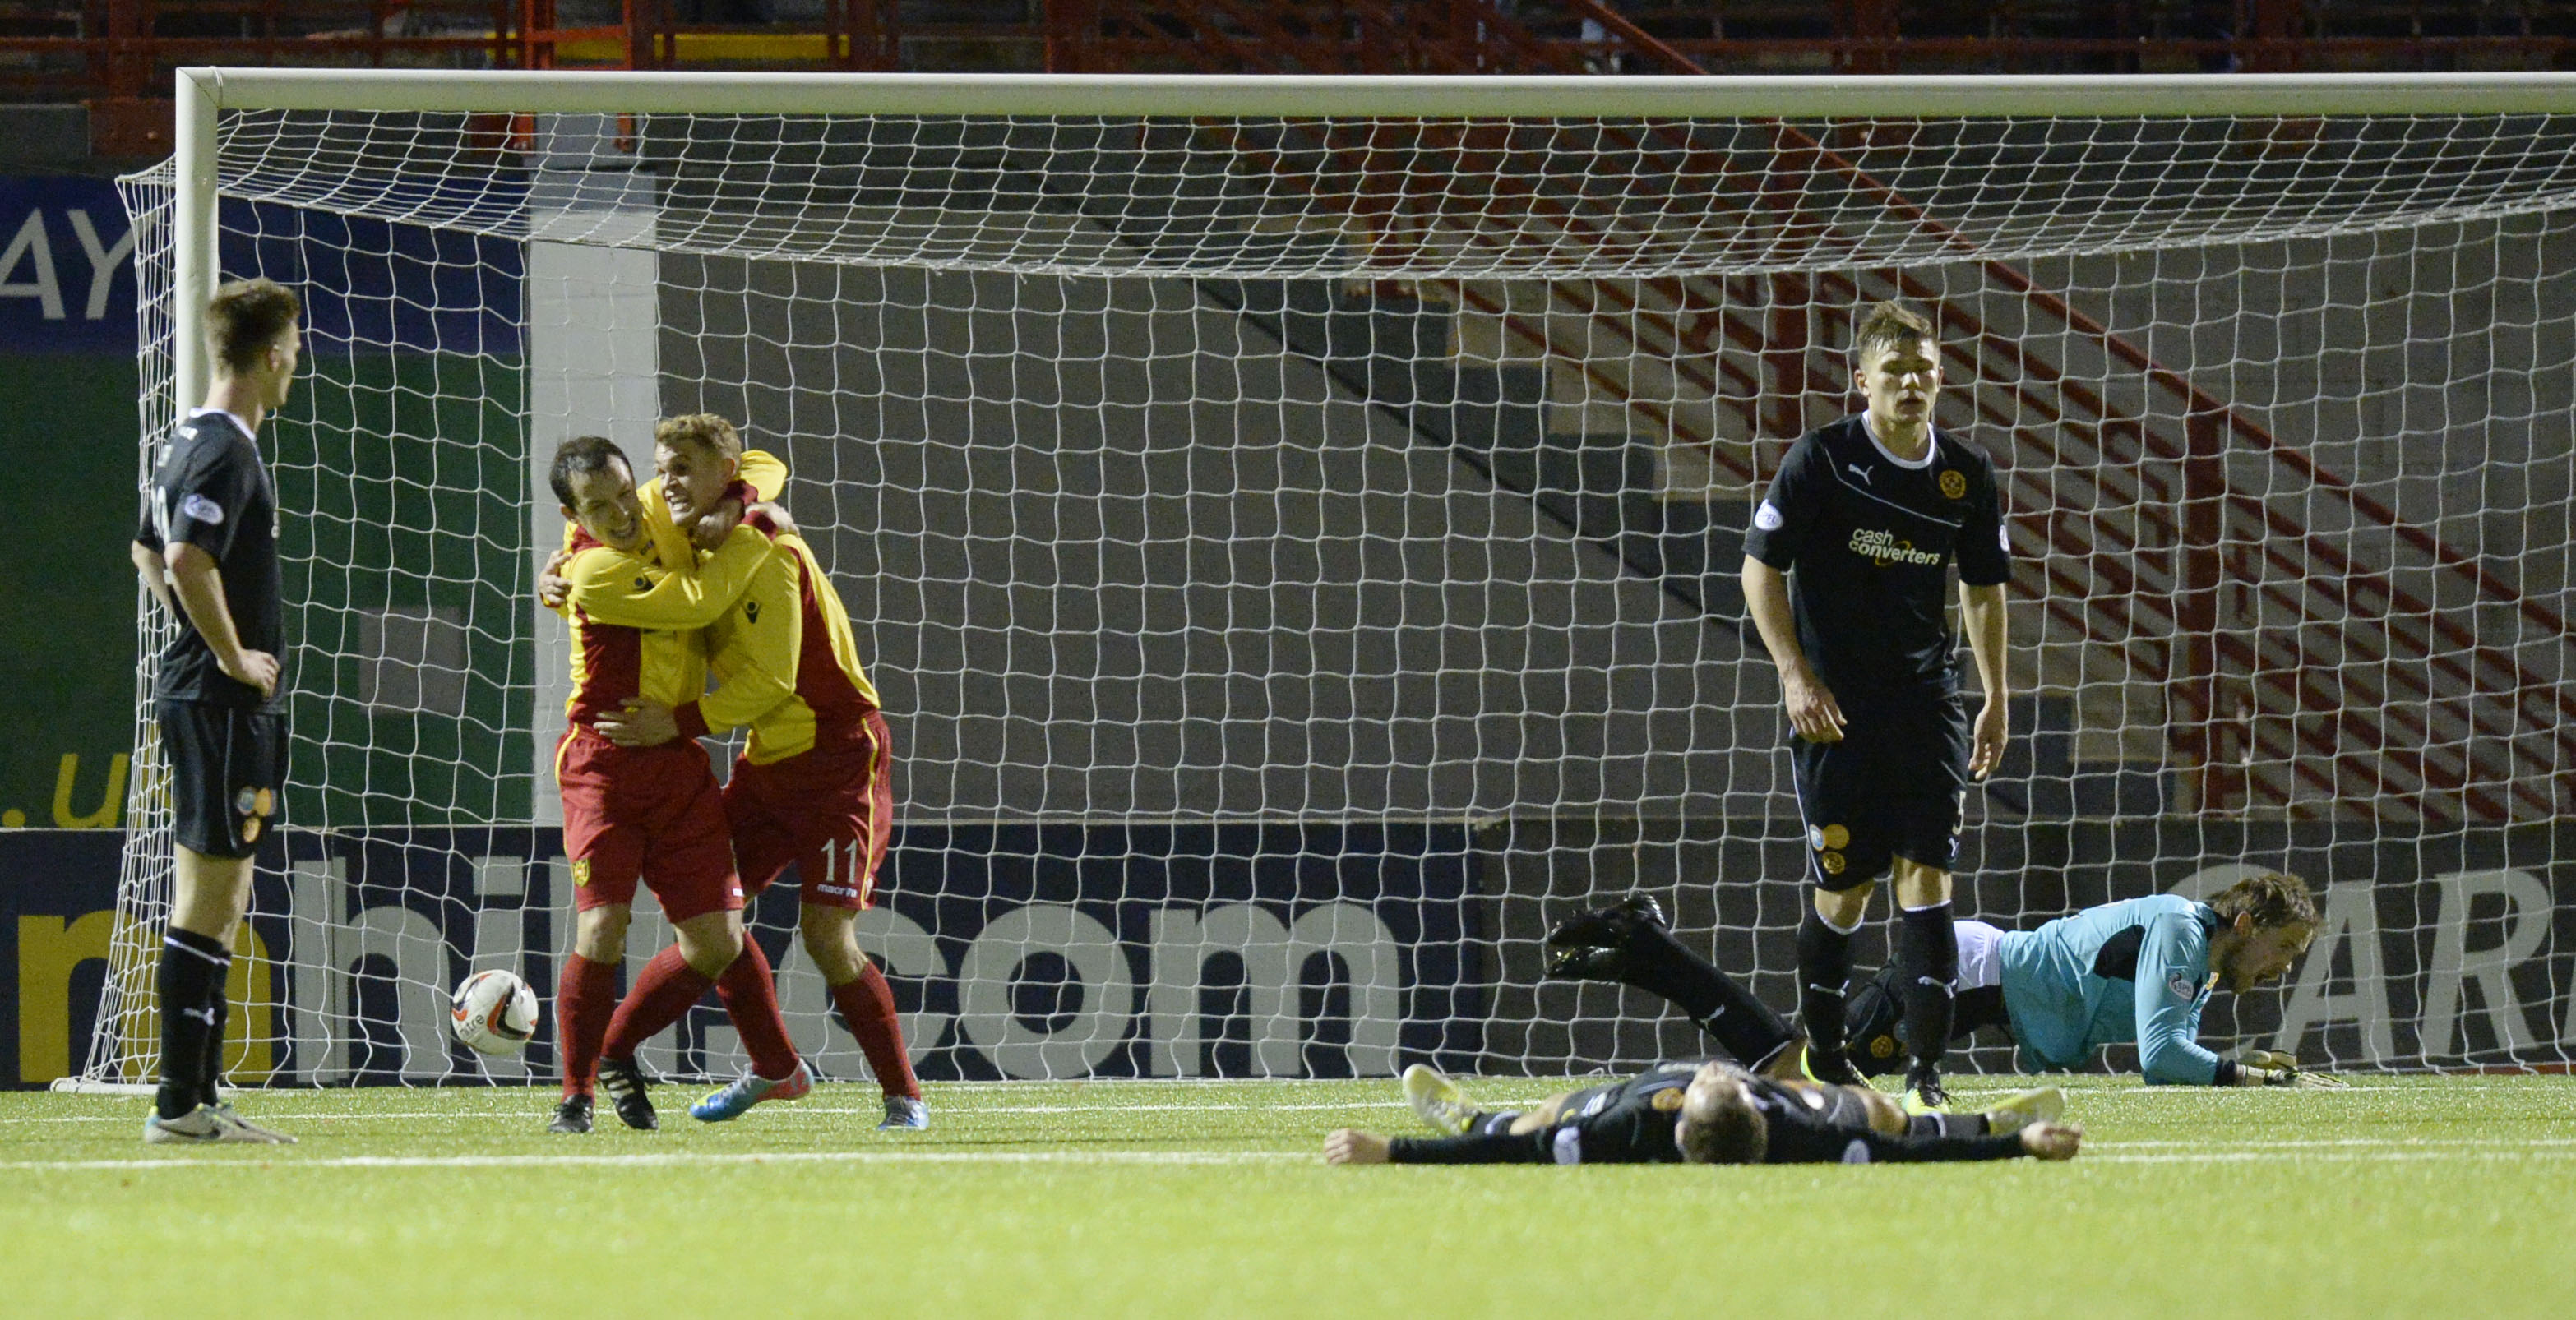 Gary Phillips (third from left) celebrates after scoring in the final minute.